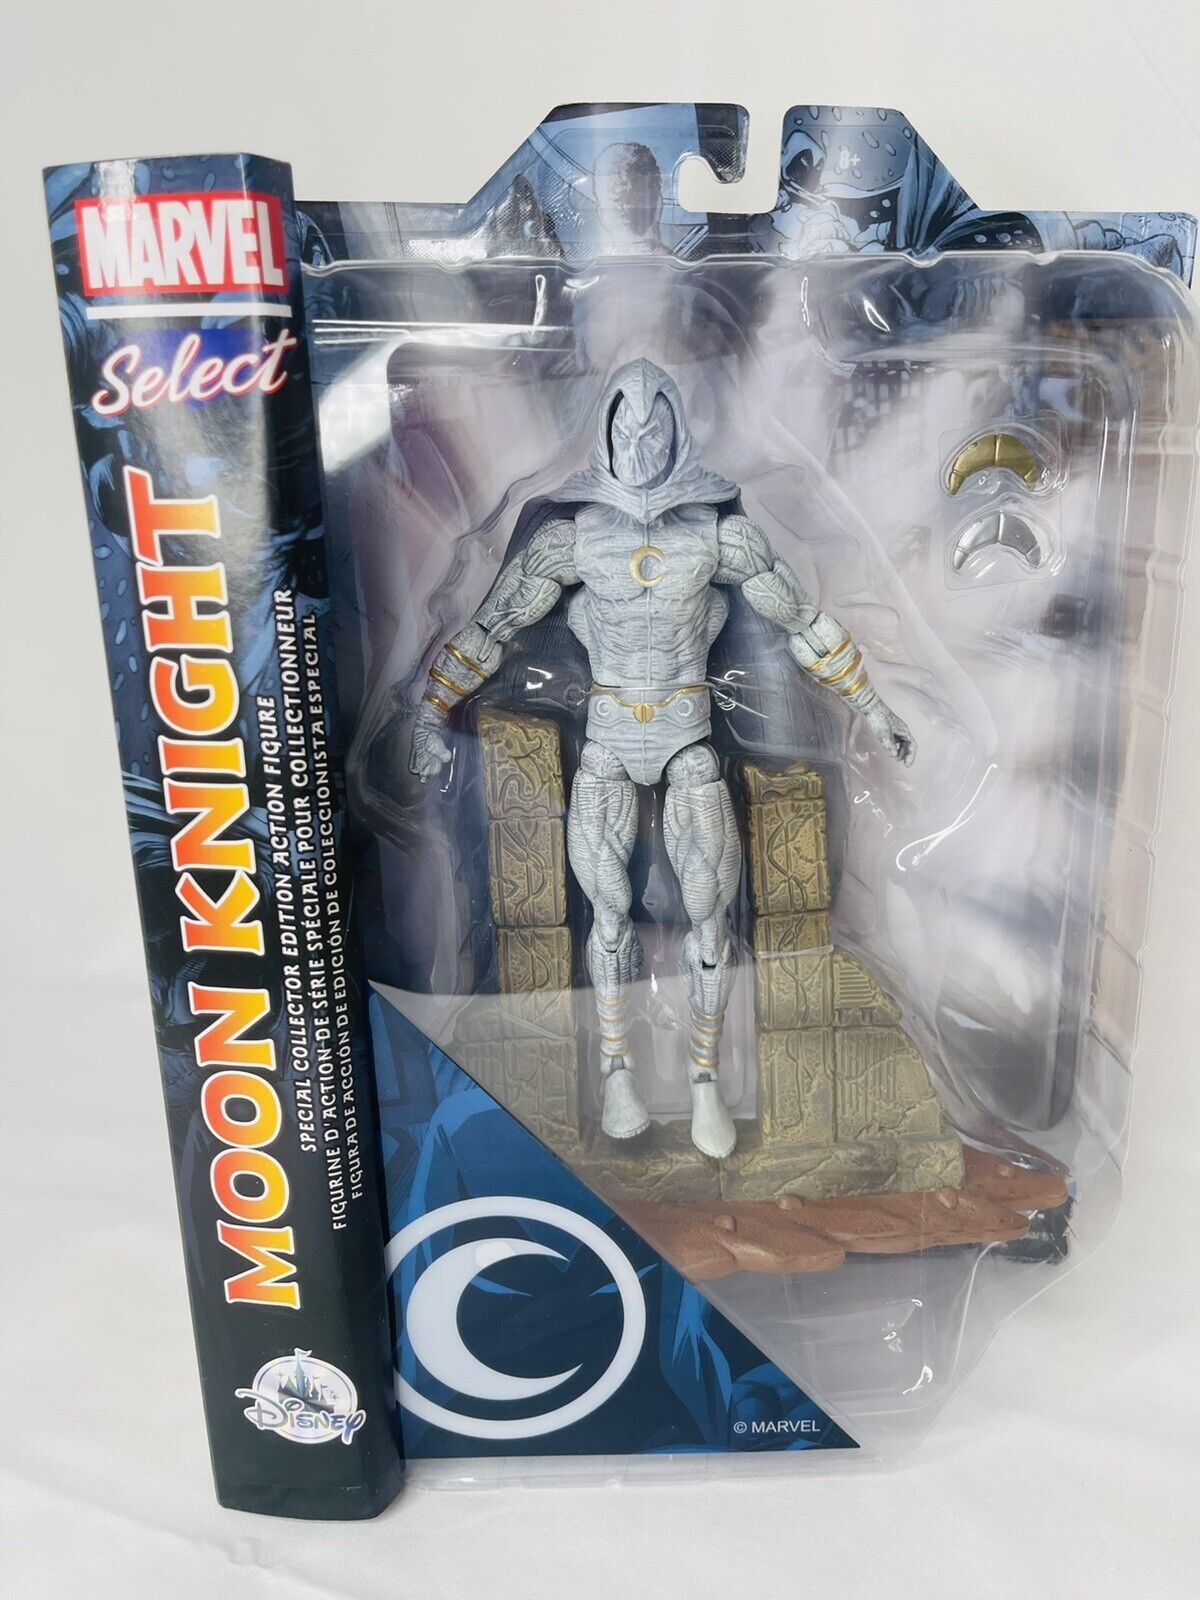 Moon Knight 7" Inch Action Figure Marvel Select by Diamond Toy - $43.62